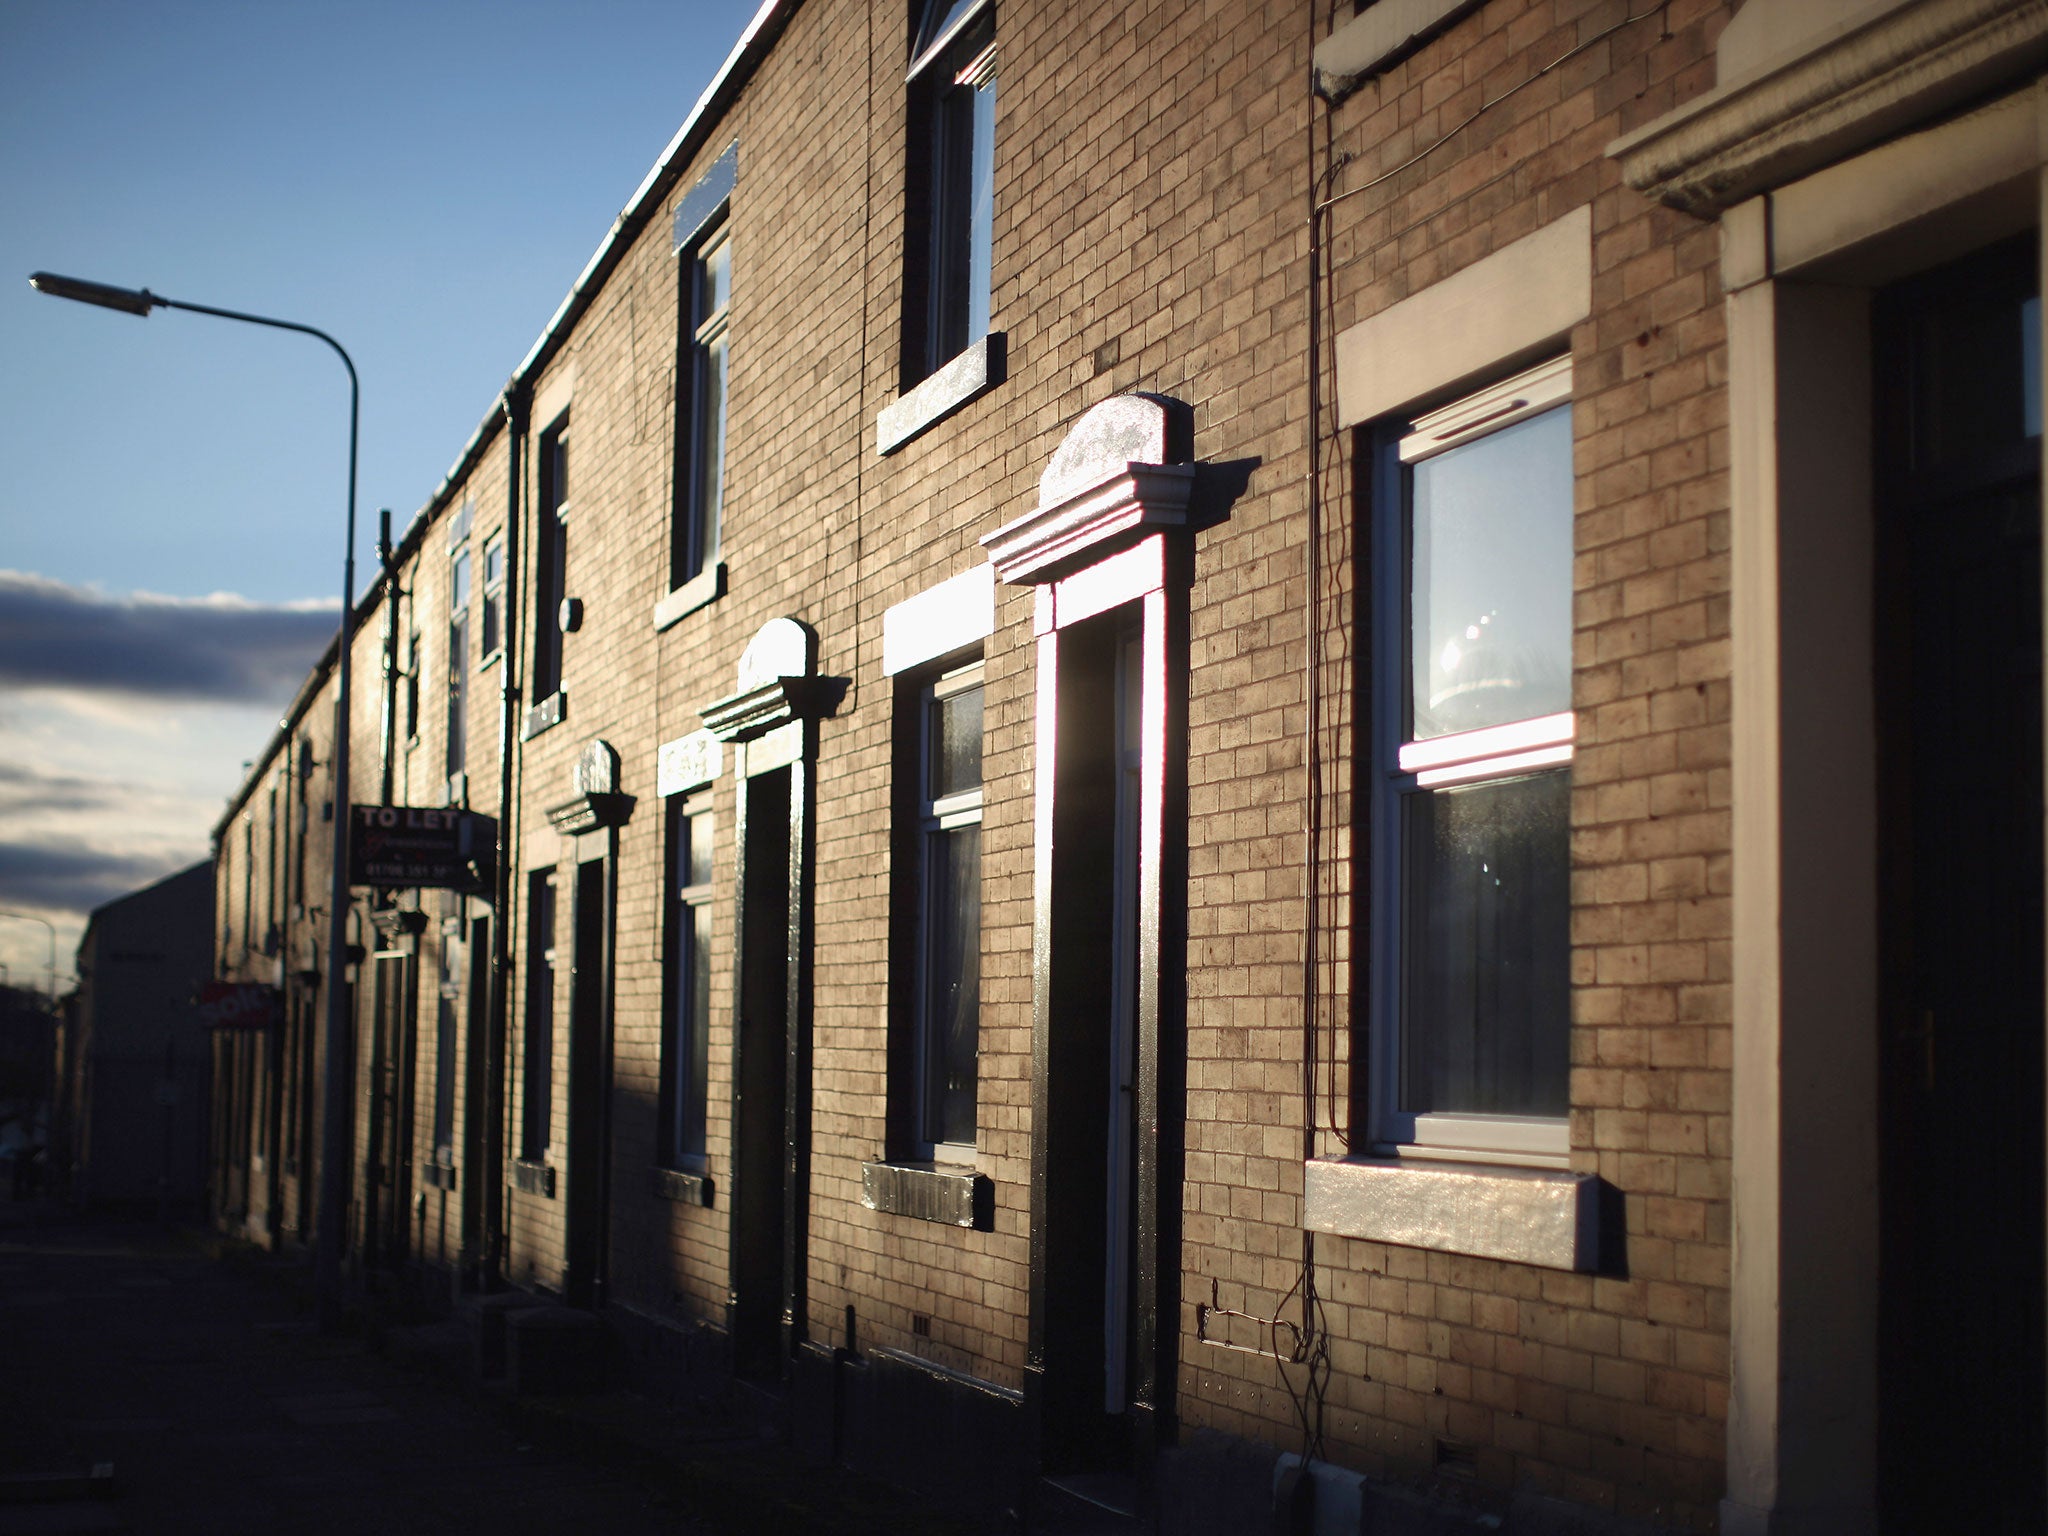 Panellists said the housing crisis was affecting the North West